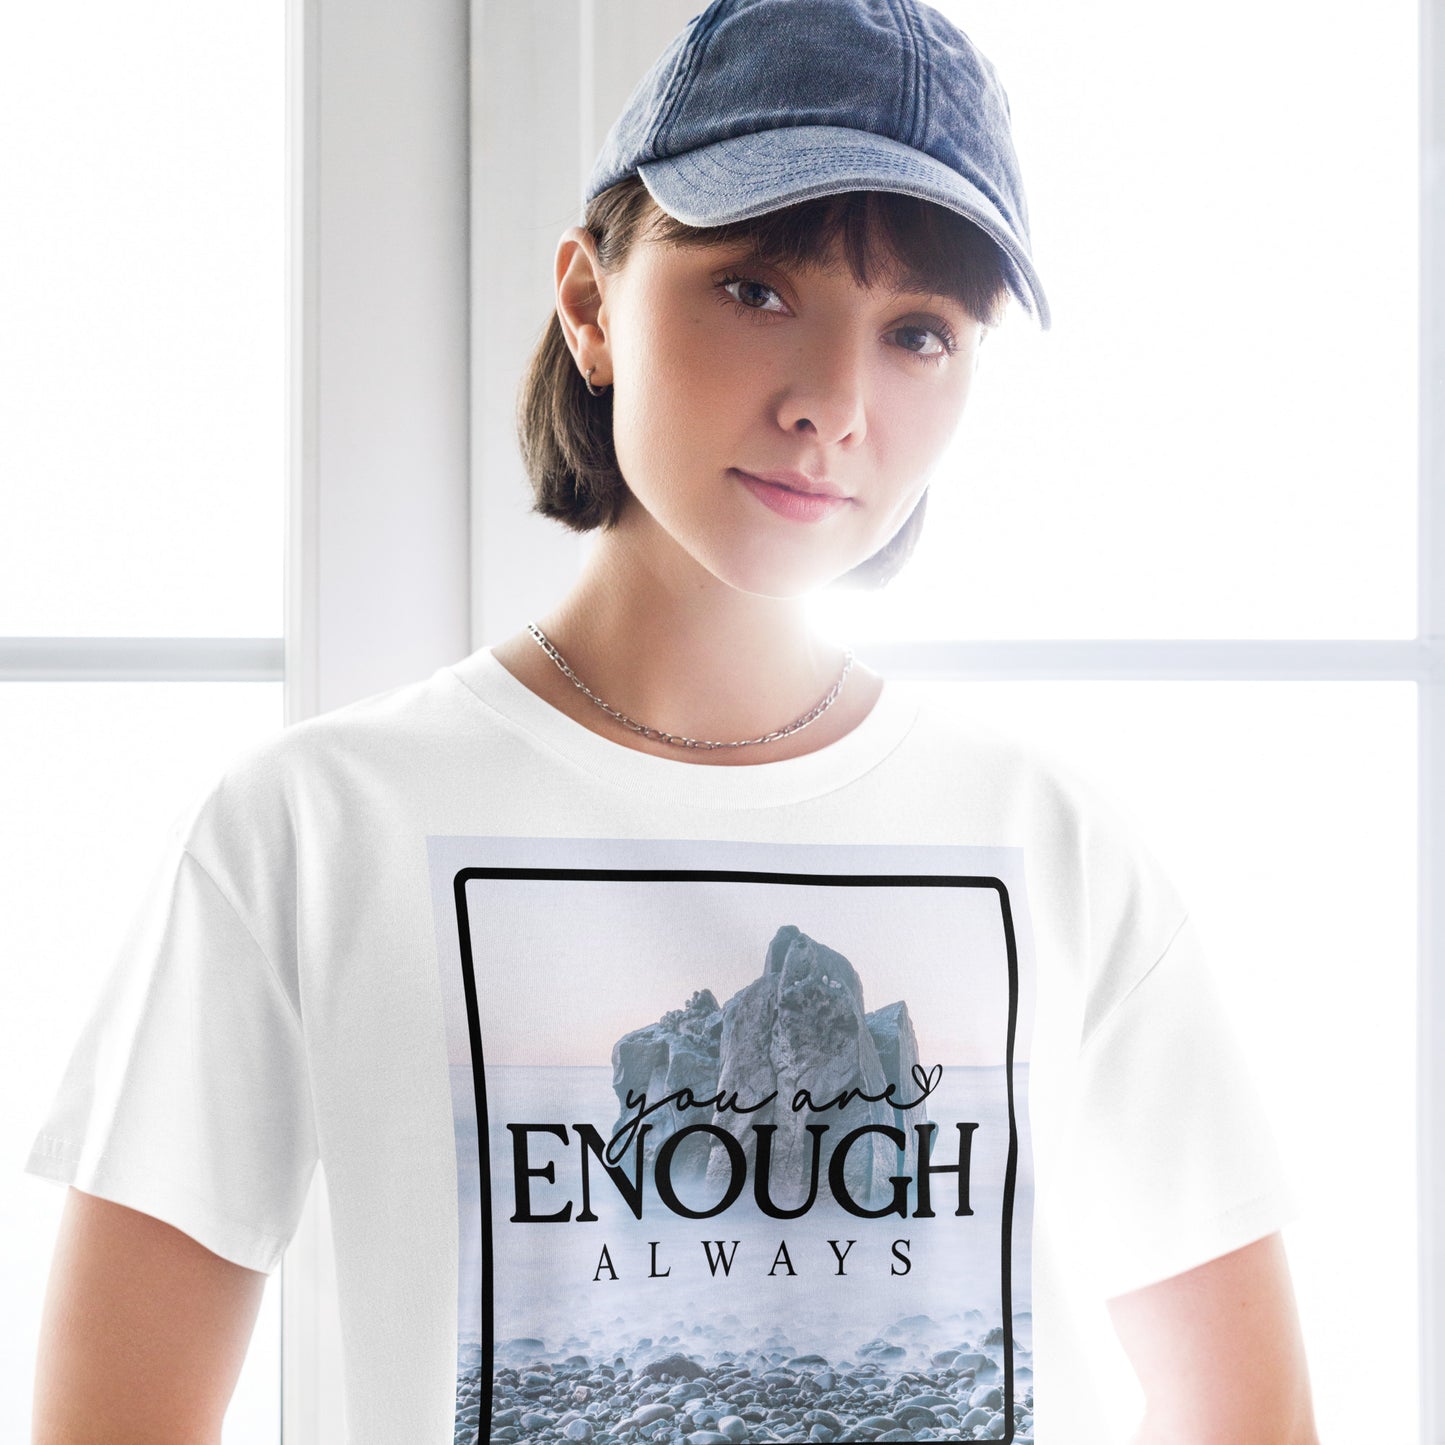 You are ENOUGH always! - Women’s crop top